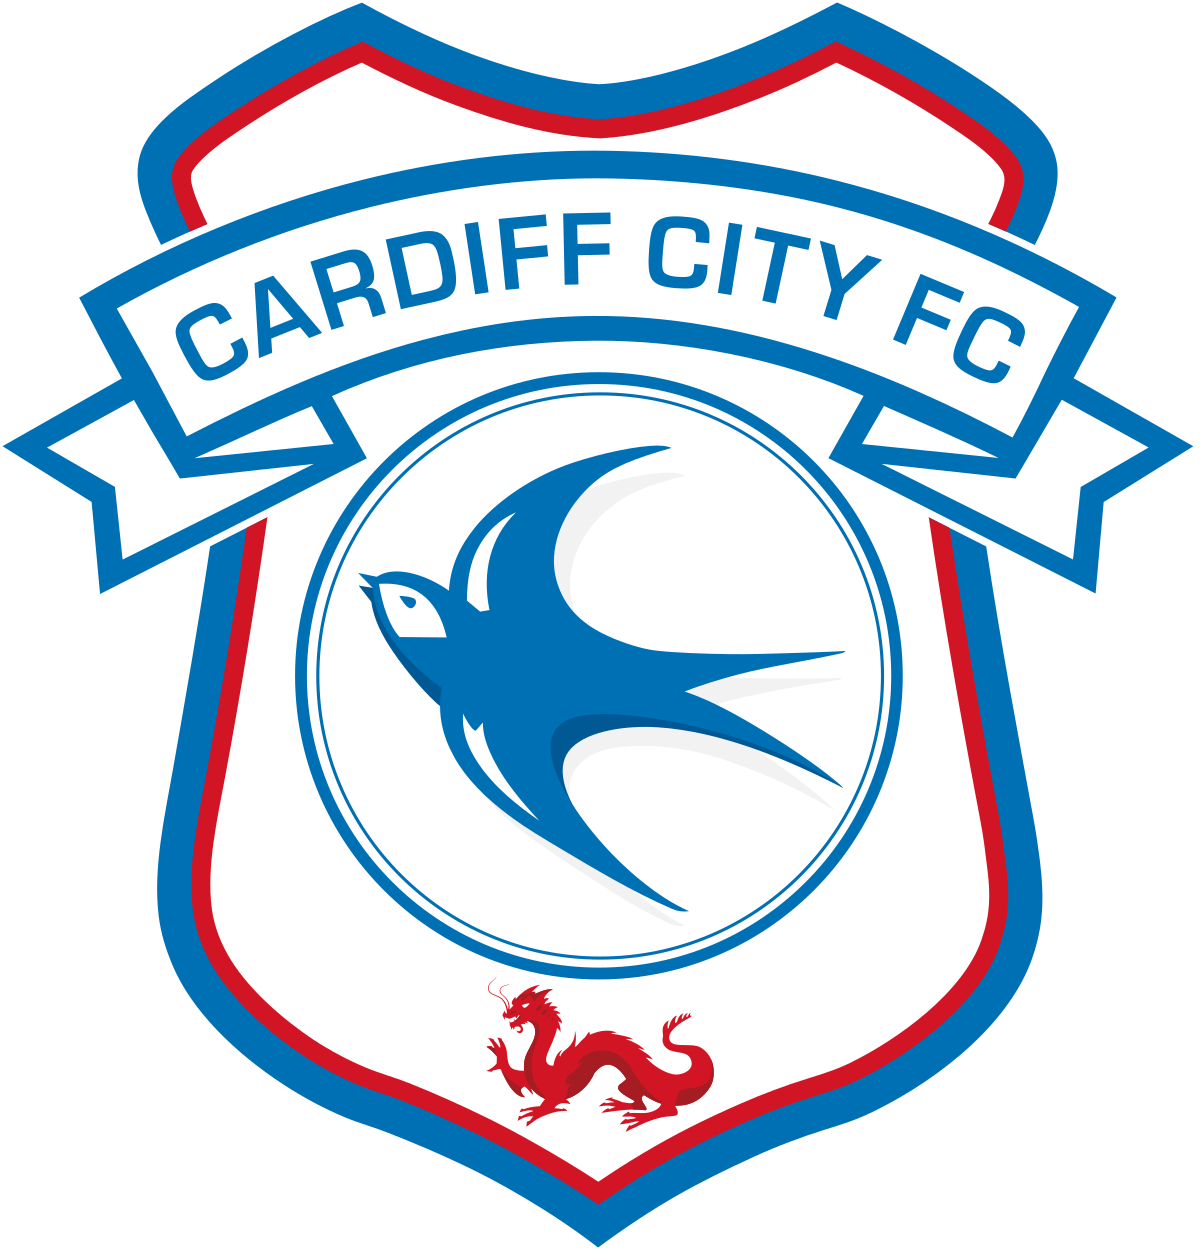 Cardiff City F C PNG Image Background